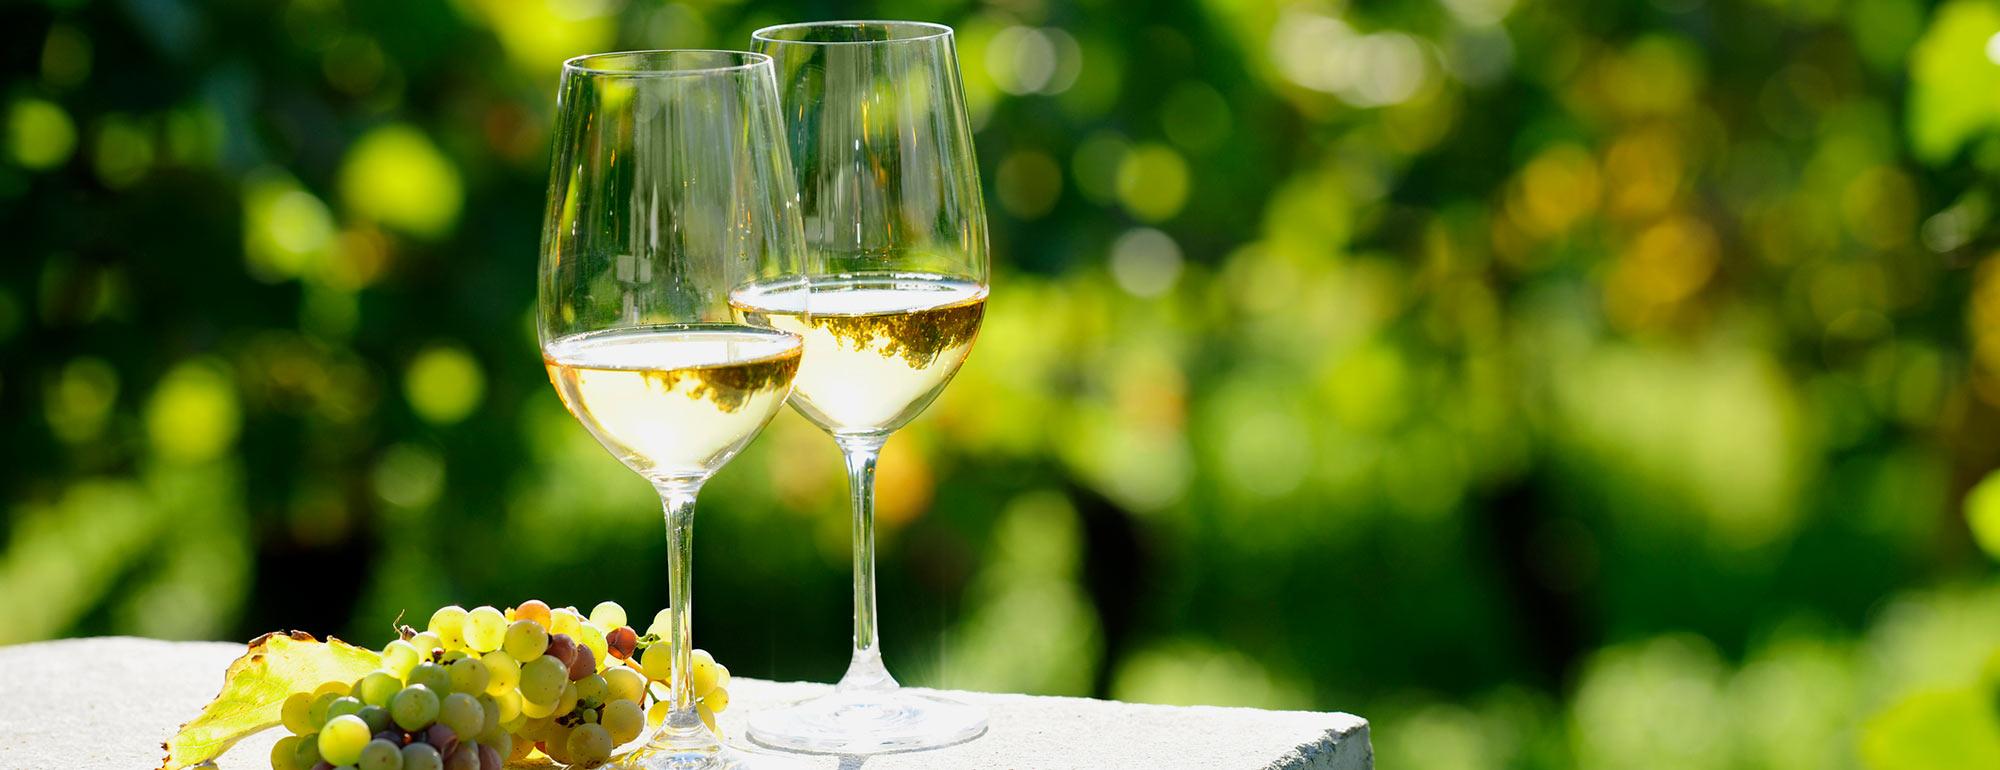 Two glasses of white wine next to white grapes on a table in front of a vineyard.